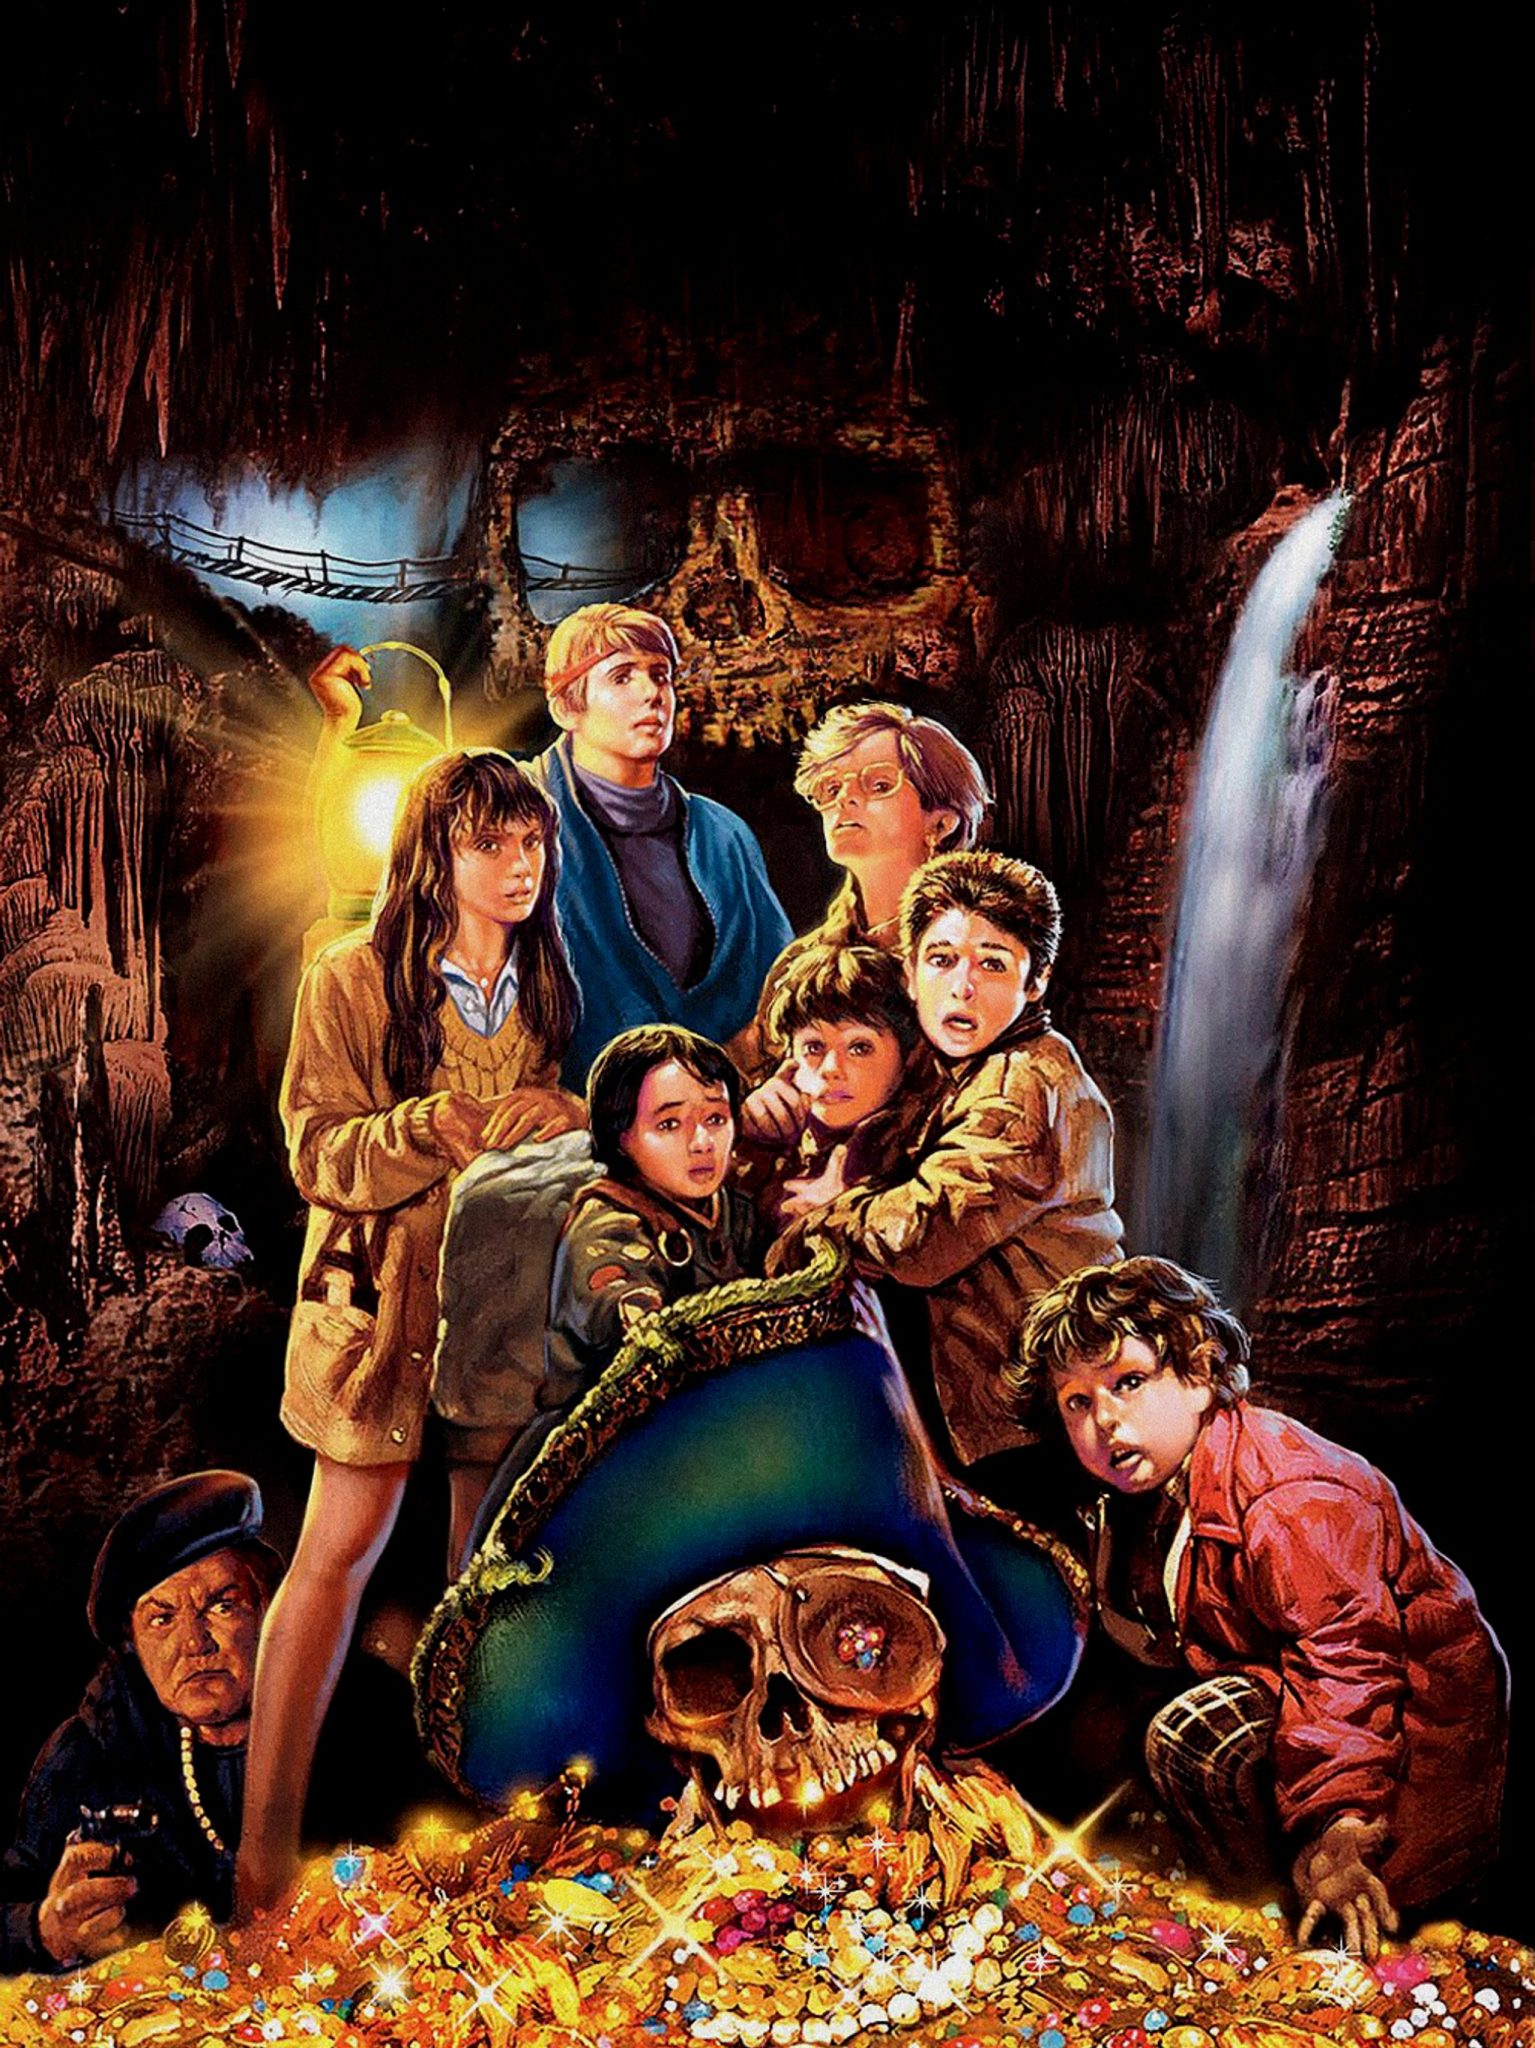 ‘Goonies’ Cast and Crew Reunite, Sequel Pitch Shot Down For Now The